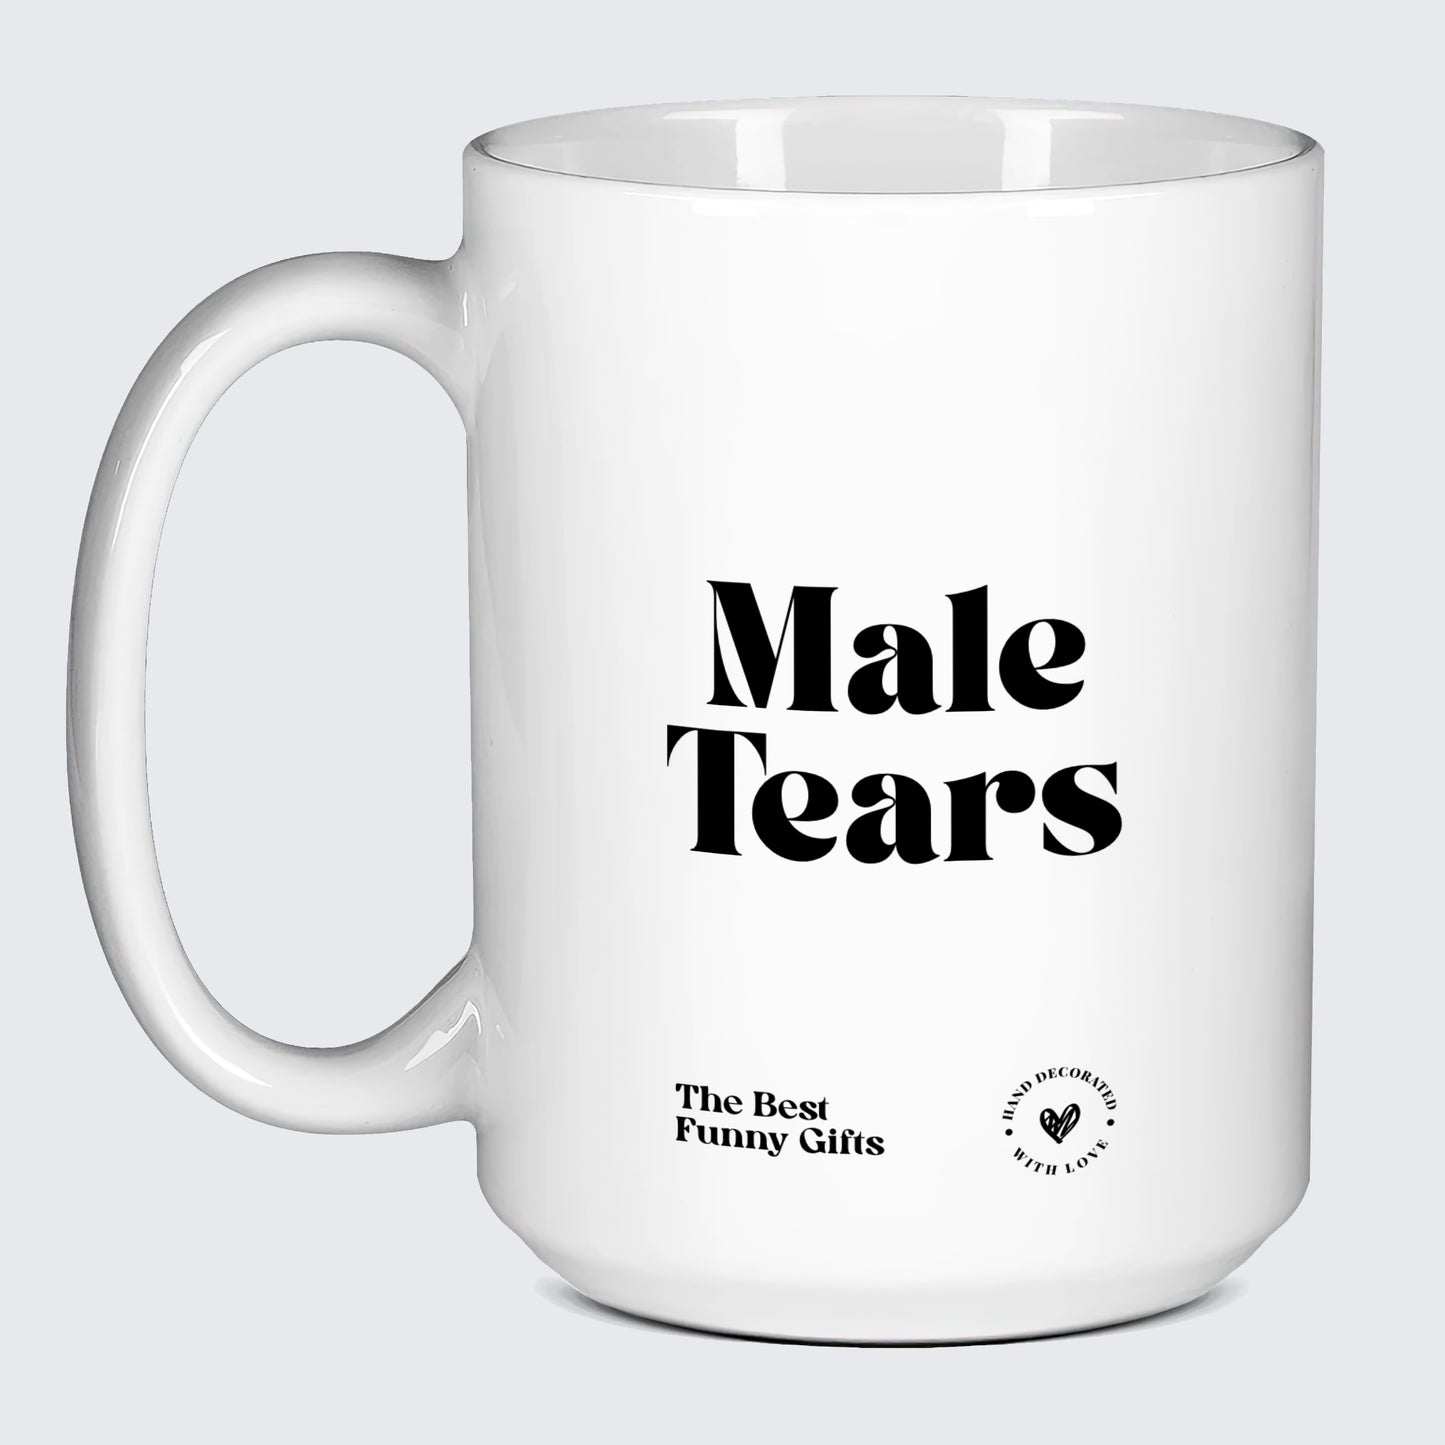 Cute Mugs Male Tears - The Best Funny Gifts